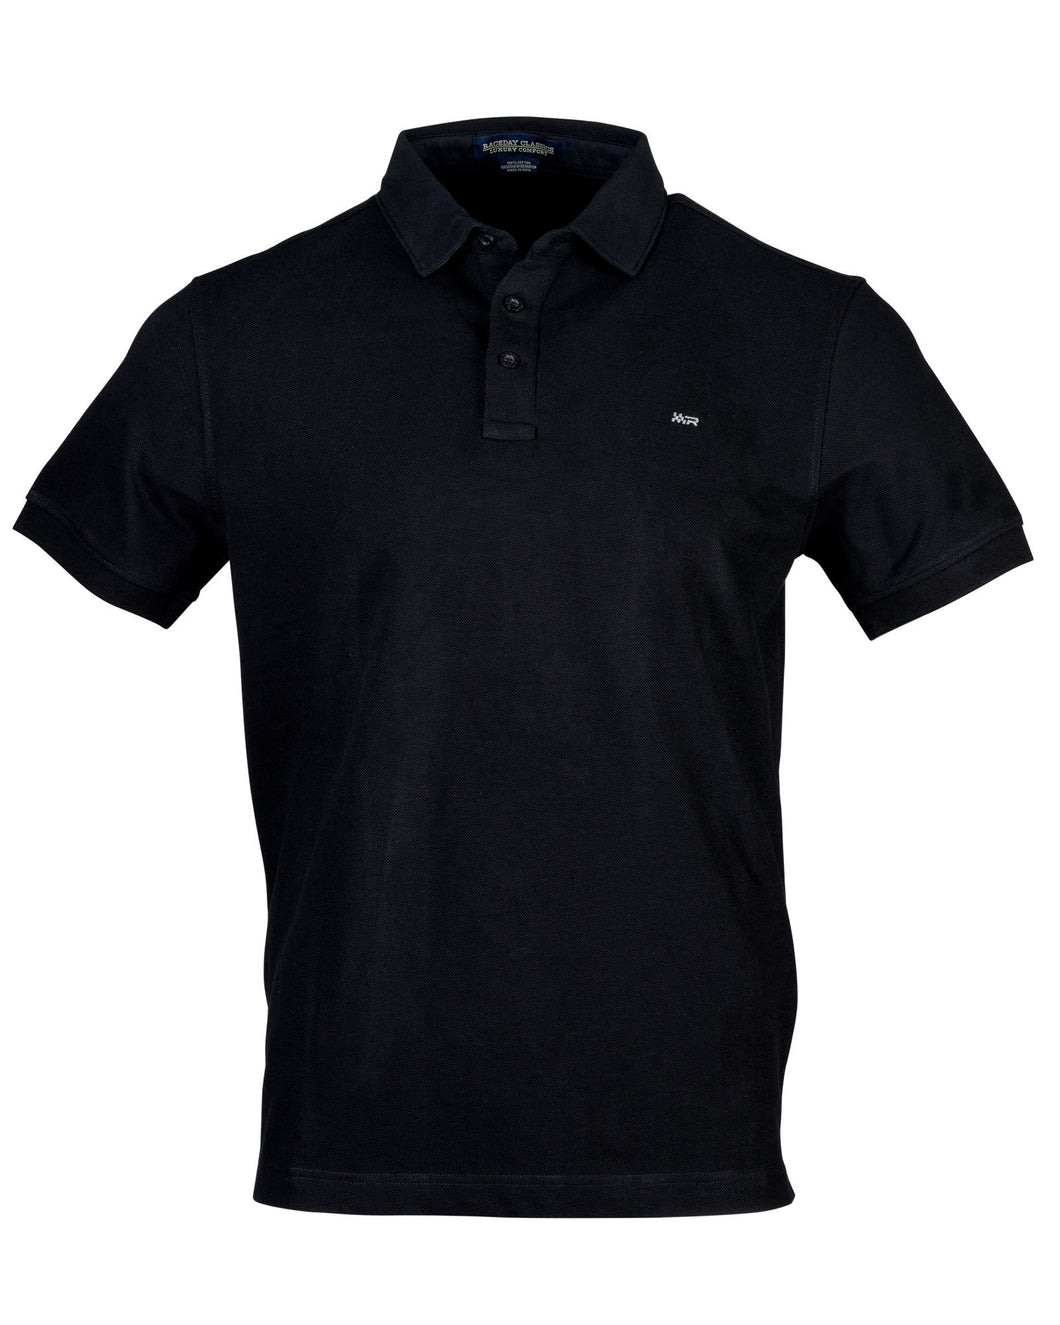 Luxury Black Polo, Short Sleeves, Perfect Collars, Thick Cotton, Regular Fit